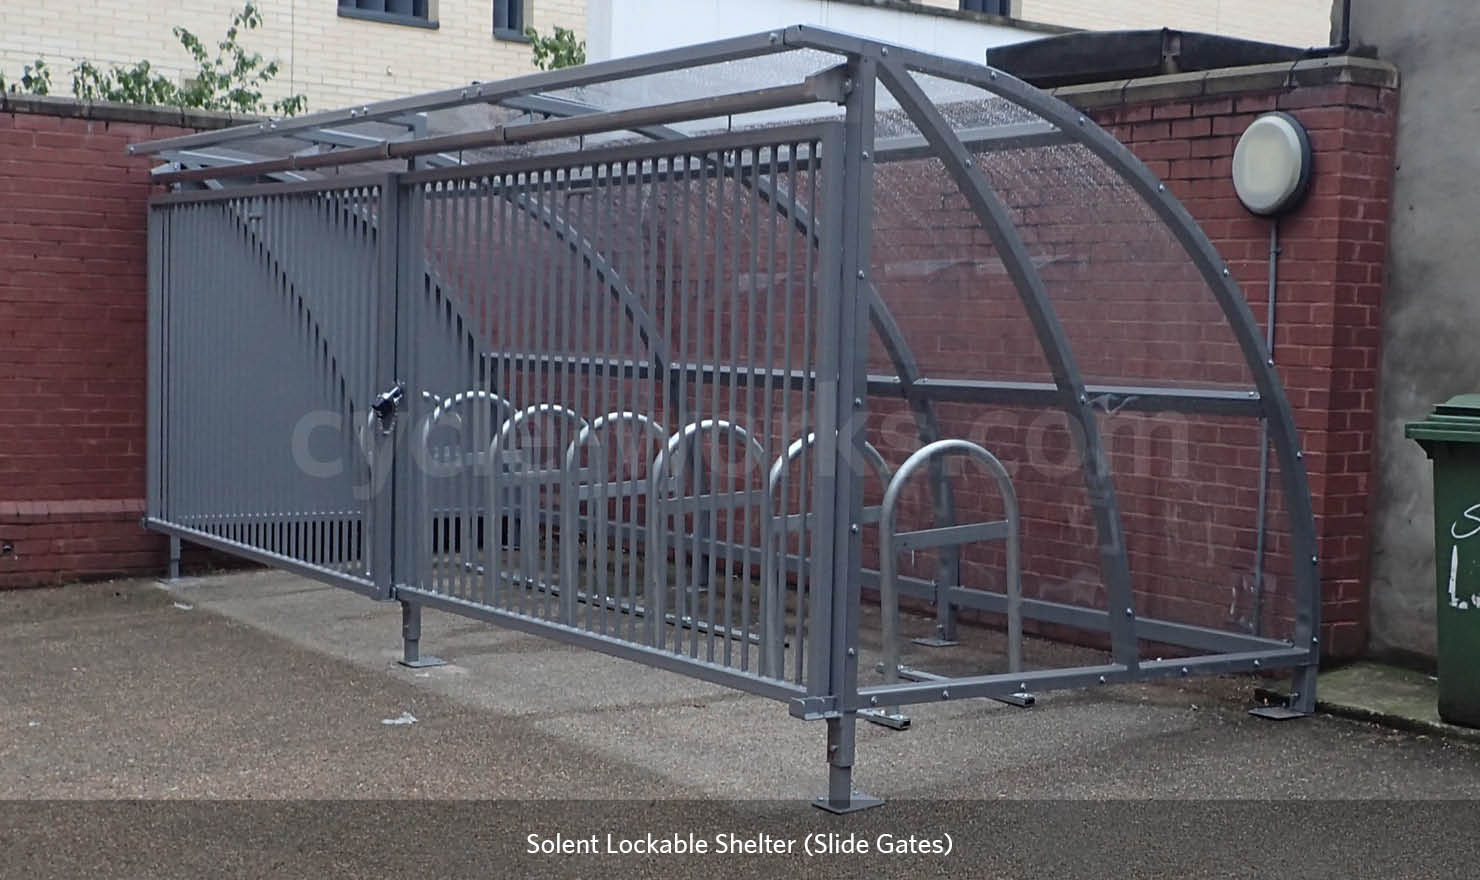 Cycle Parking Shelter